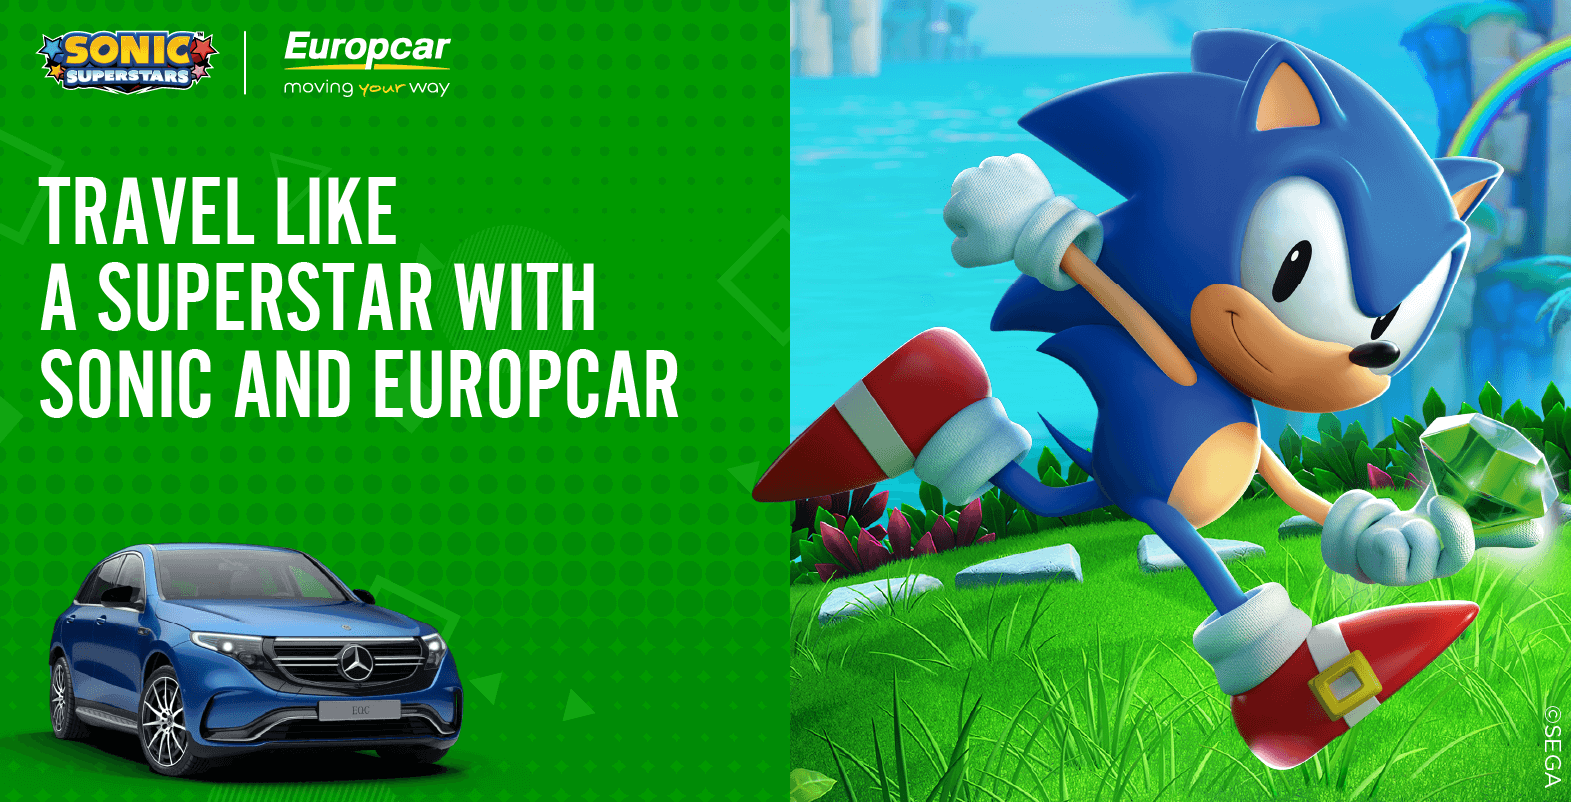 Win your own Nintendo Switch & Sonic Superstars with Europcar